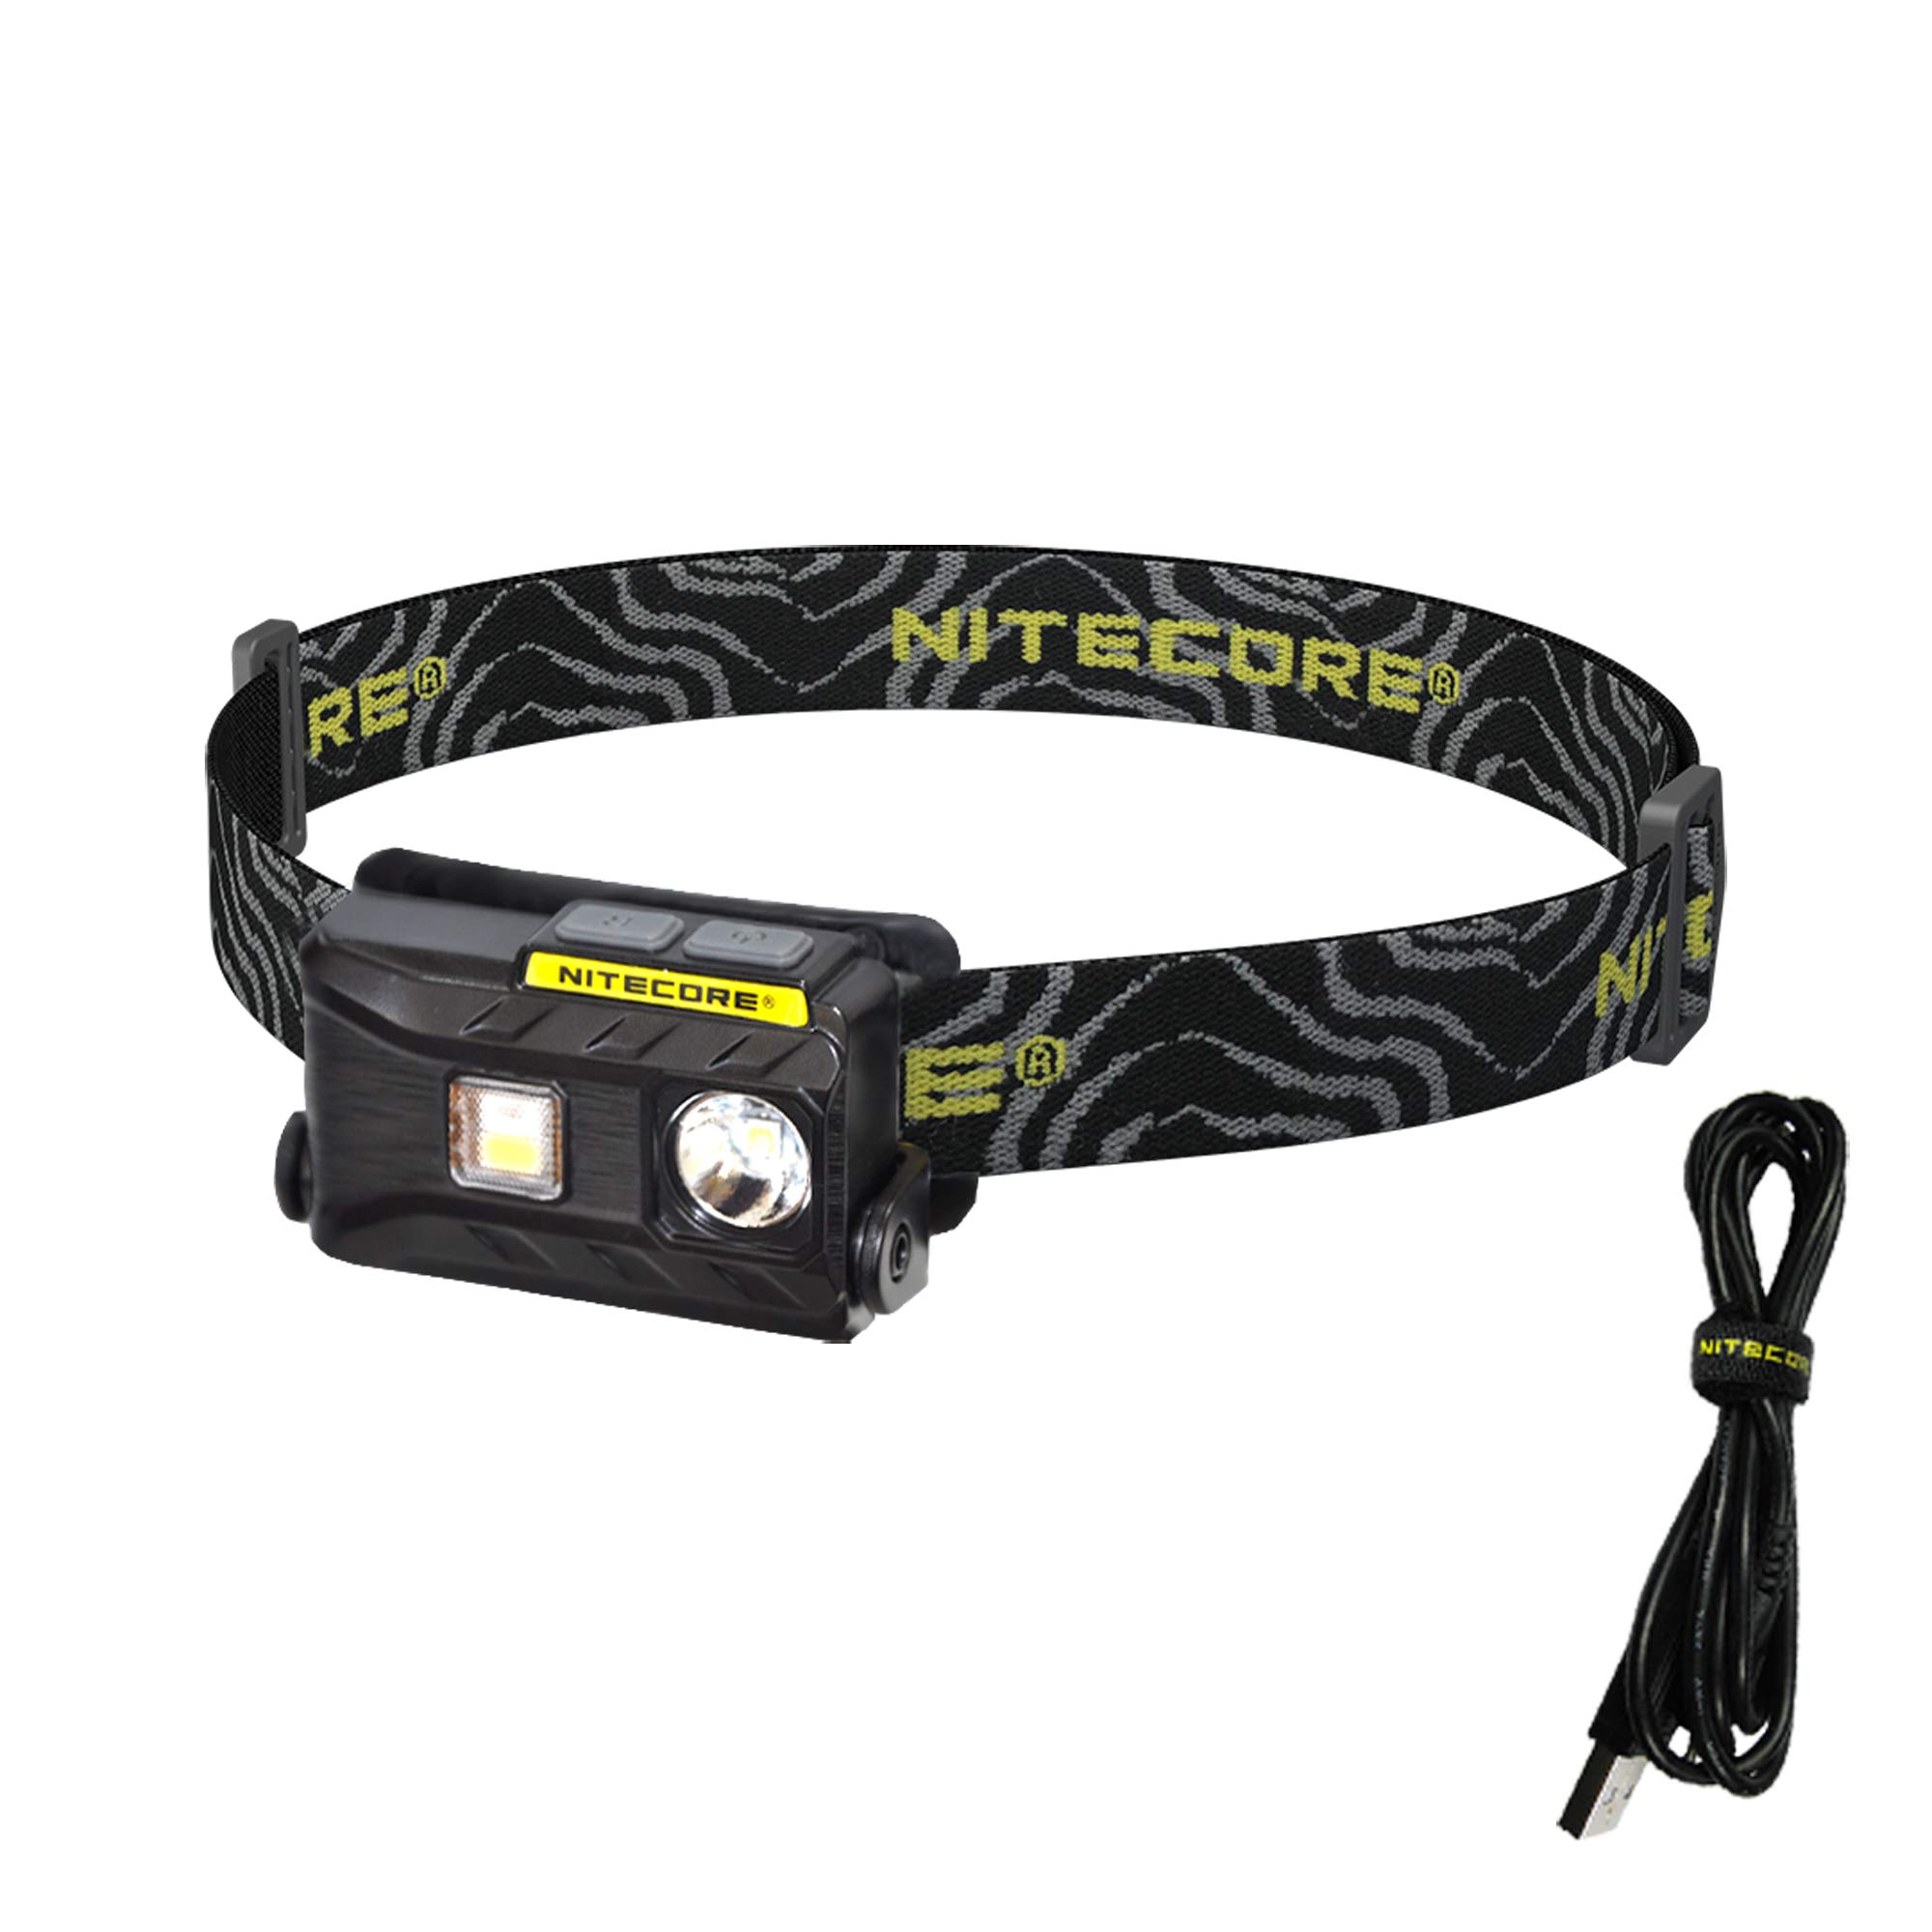 Book Cover Nitecore NU25 360 Lumen Triple Output - White, Red, High CRI - 0.99 Ounce Lightweight USB Rechargeable Headlamp with LumenTac Adapter